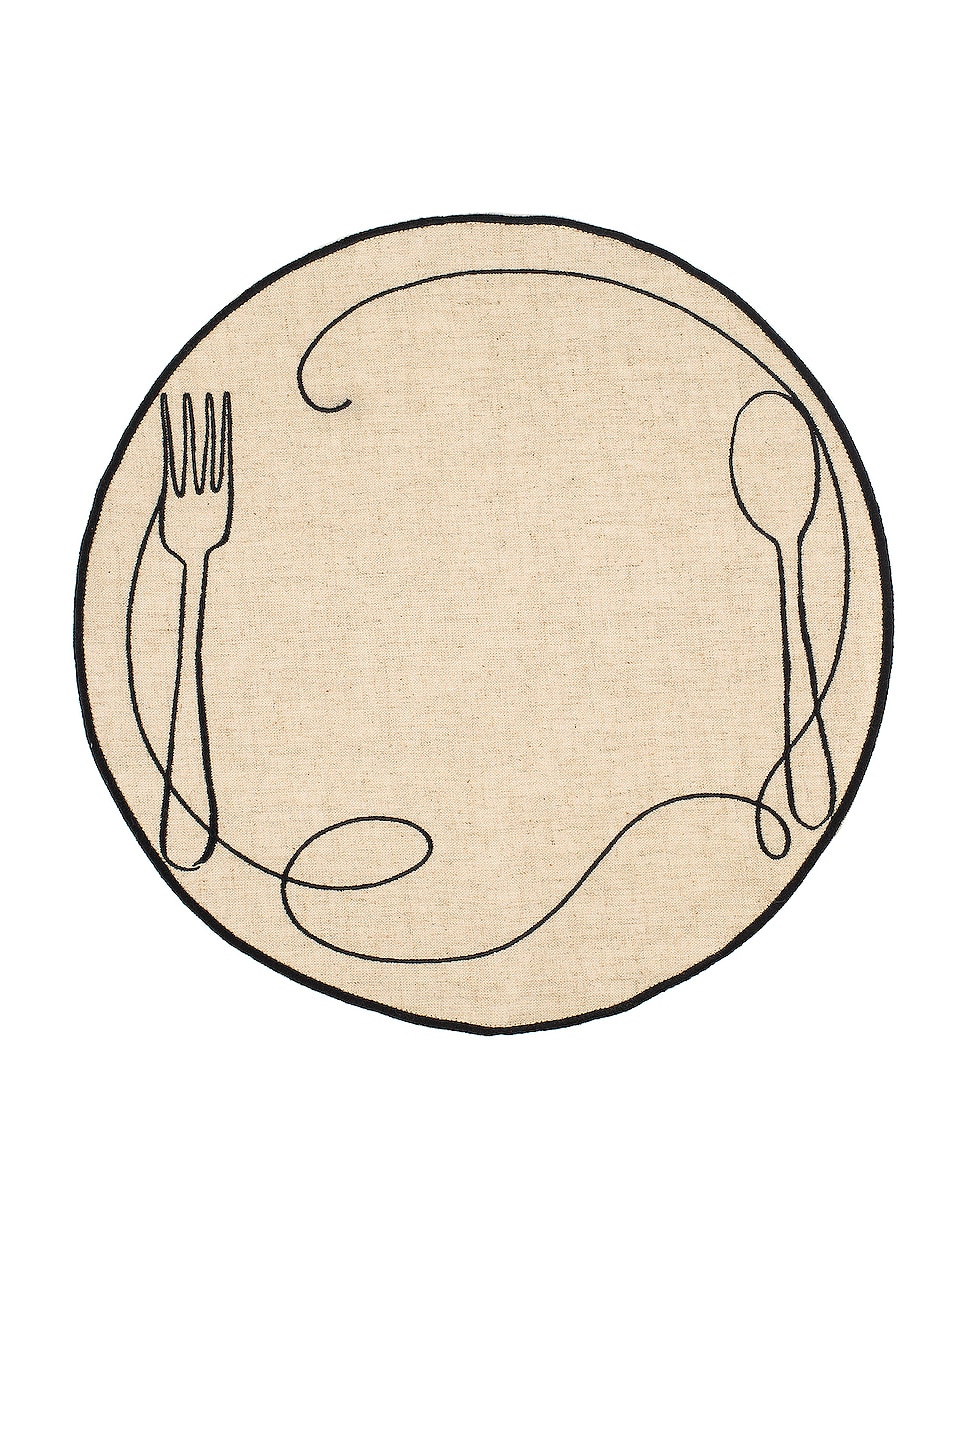 Image 1 of Misette Embroidered Linen Placemats Set Of 4 in Line Drawing